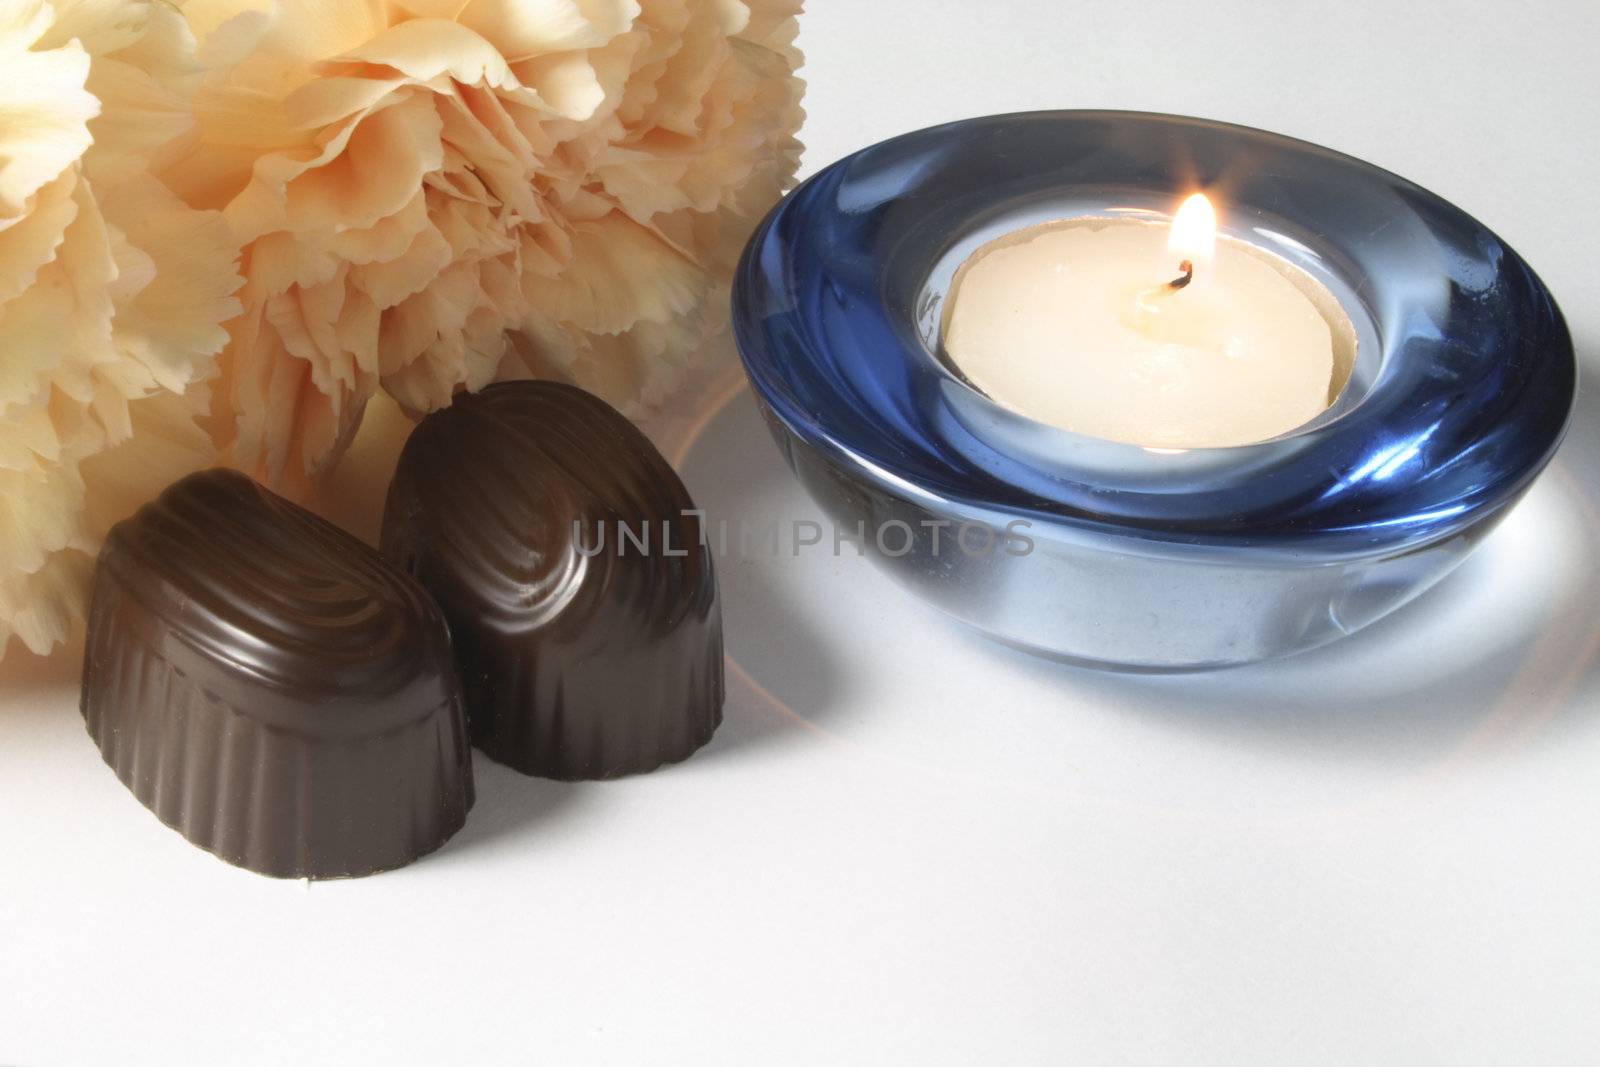 chocolates and carnation with a candle by leafy